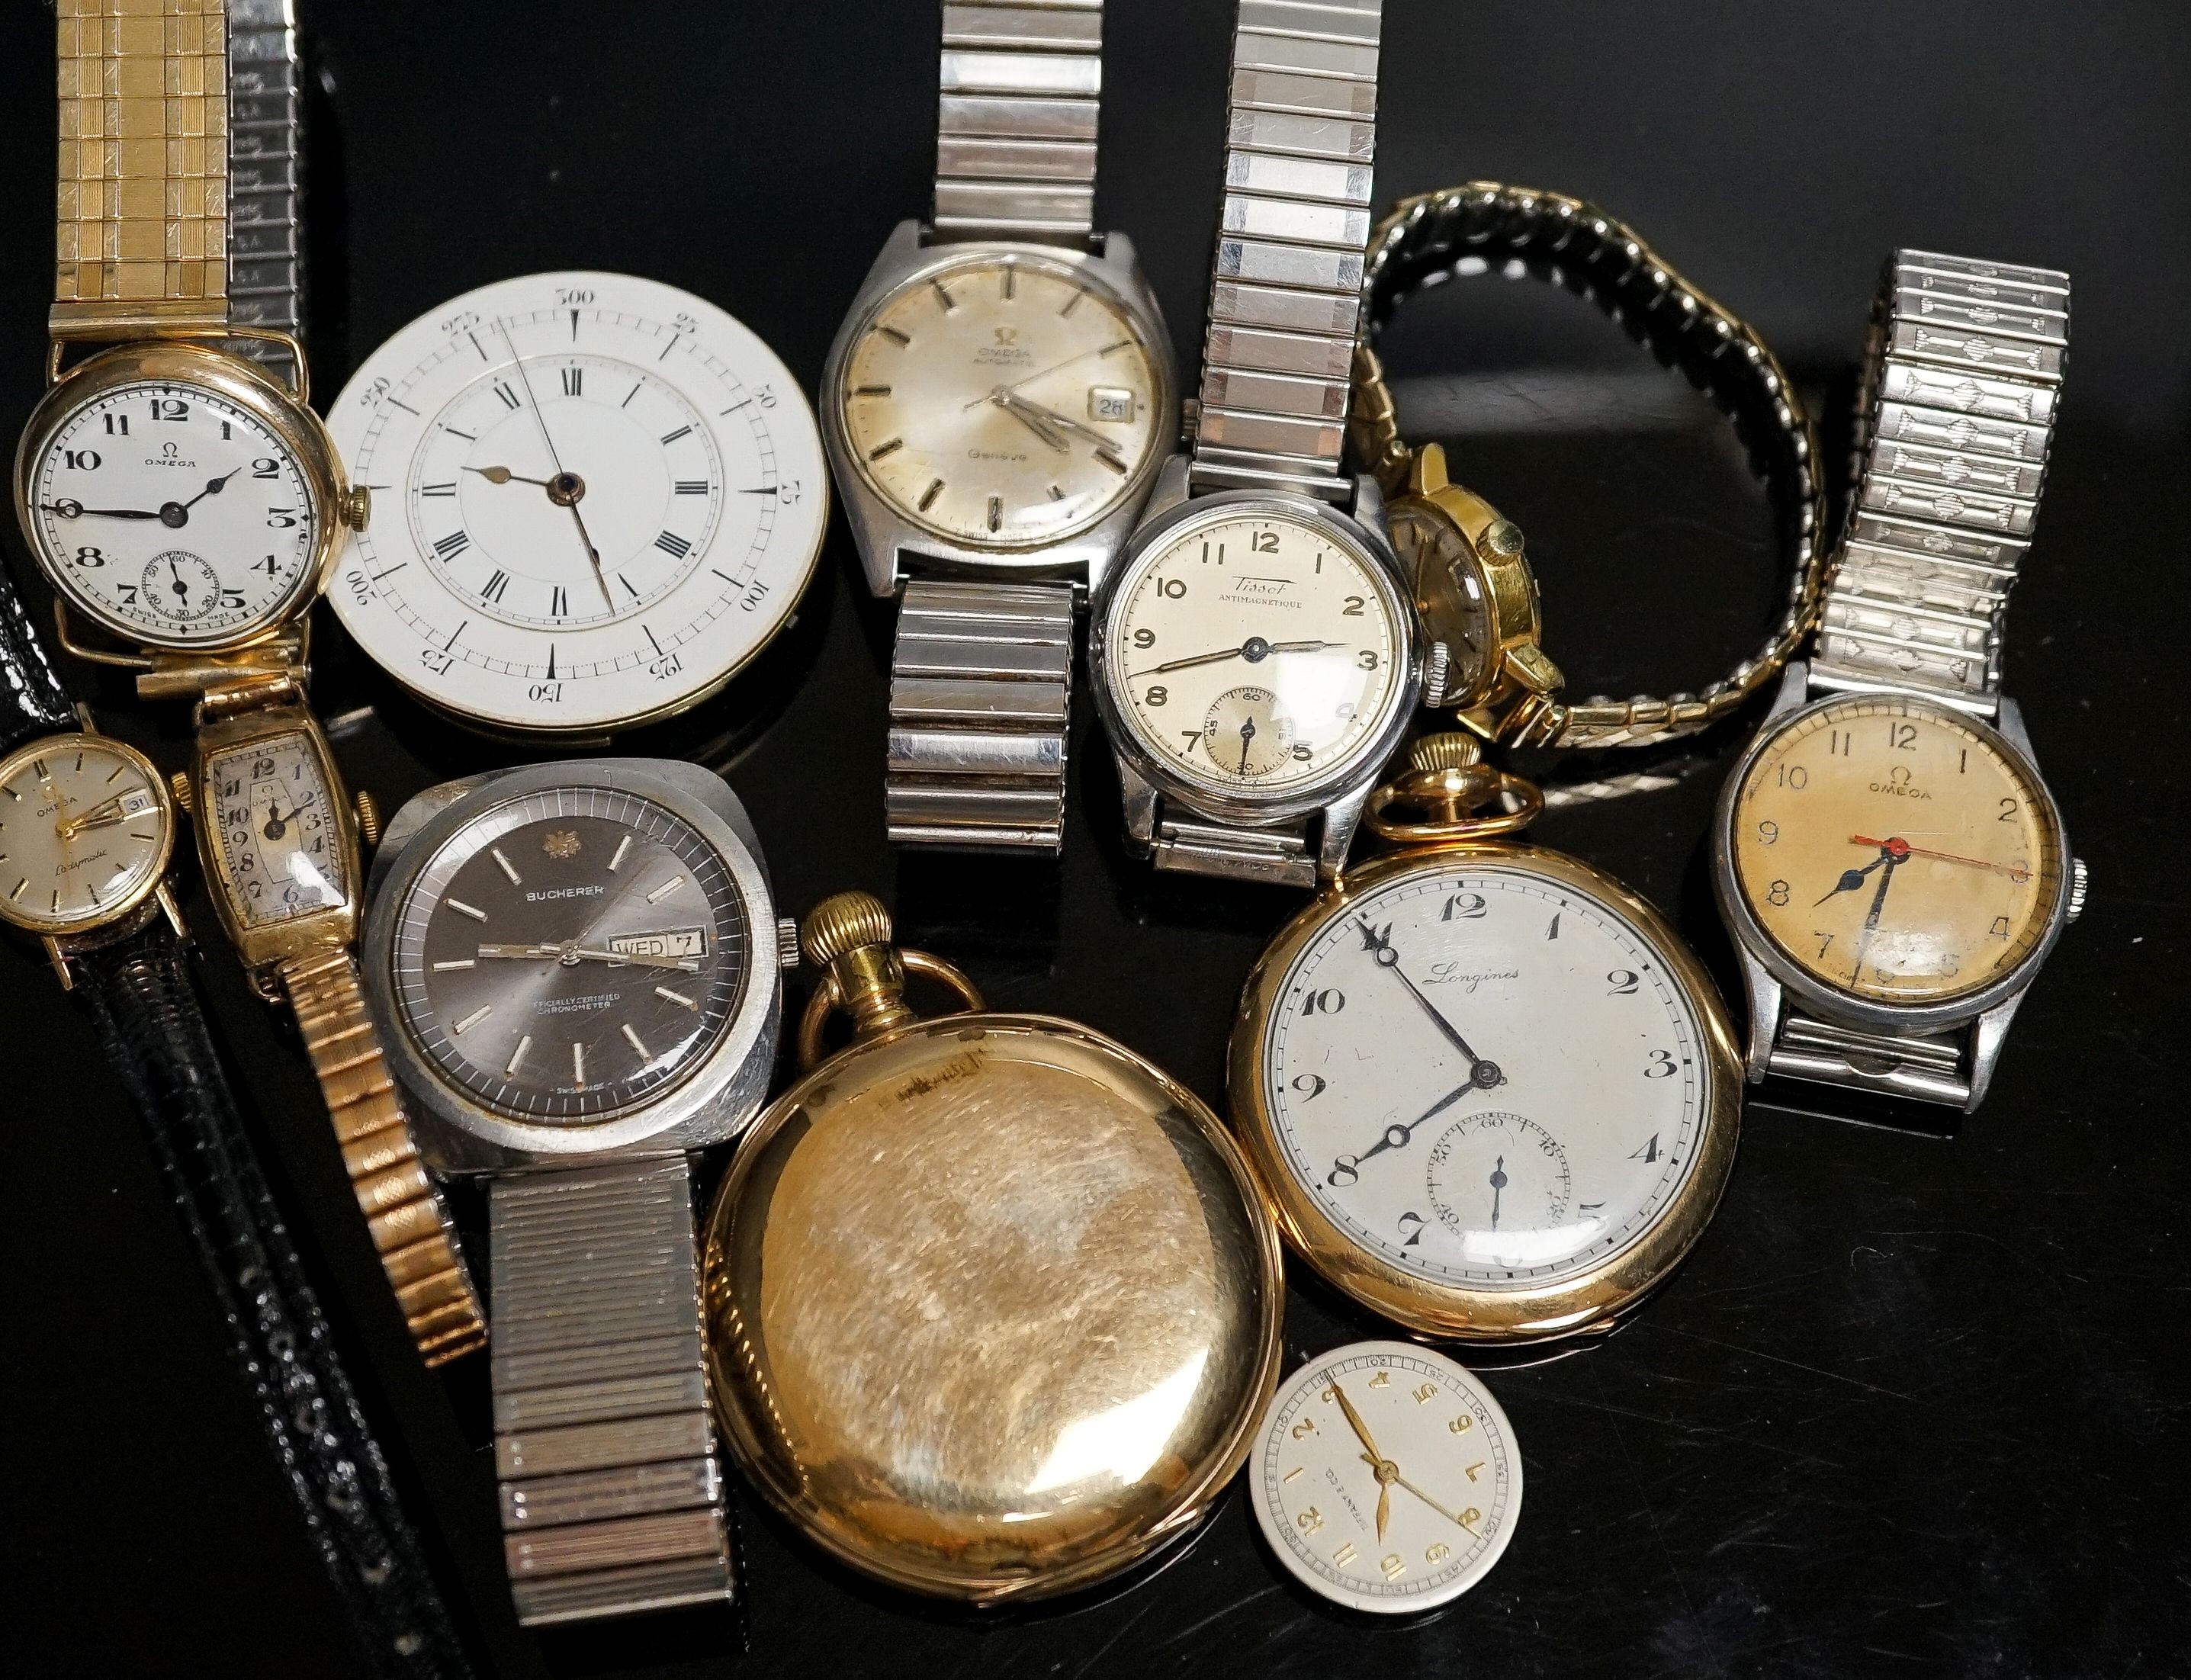 A group of assorted steel or gold plated wrist and pocket watches including six Omega (one military) and one Bucherer watch.